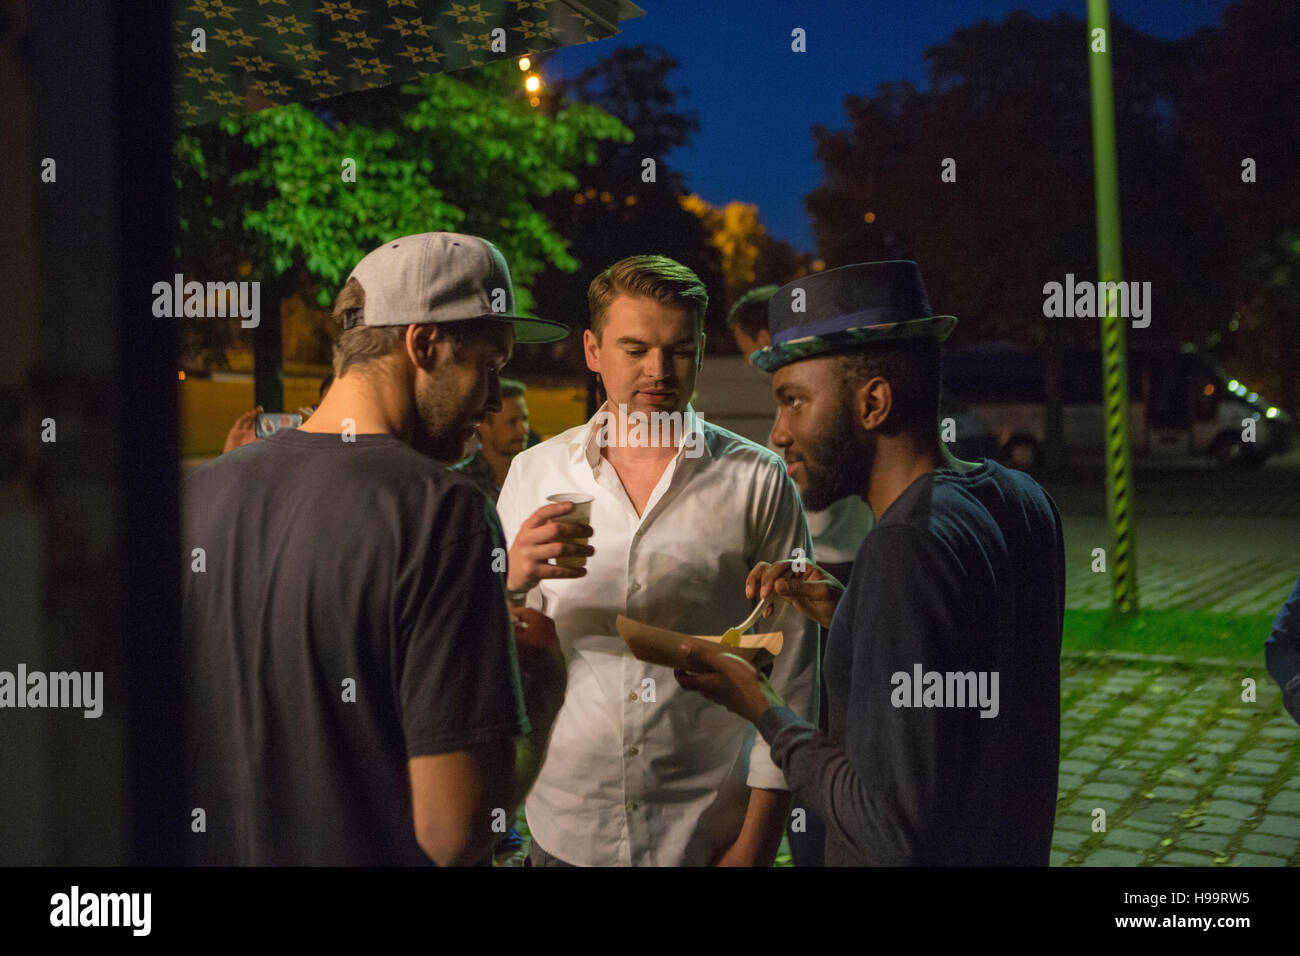 Group of customers at food truck drinking and eating Stock Photo